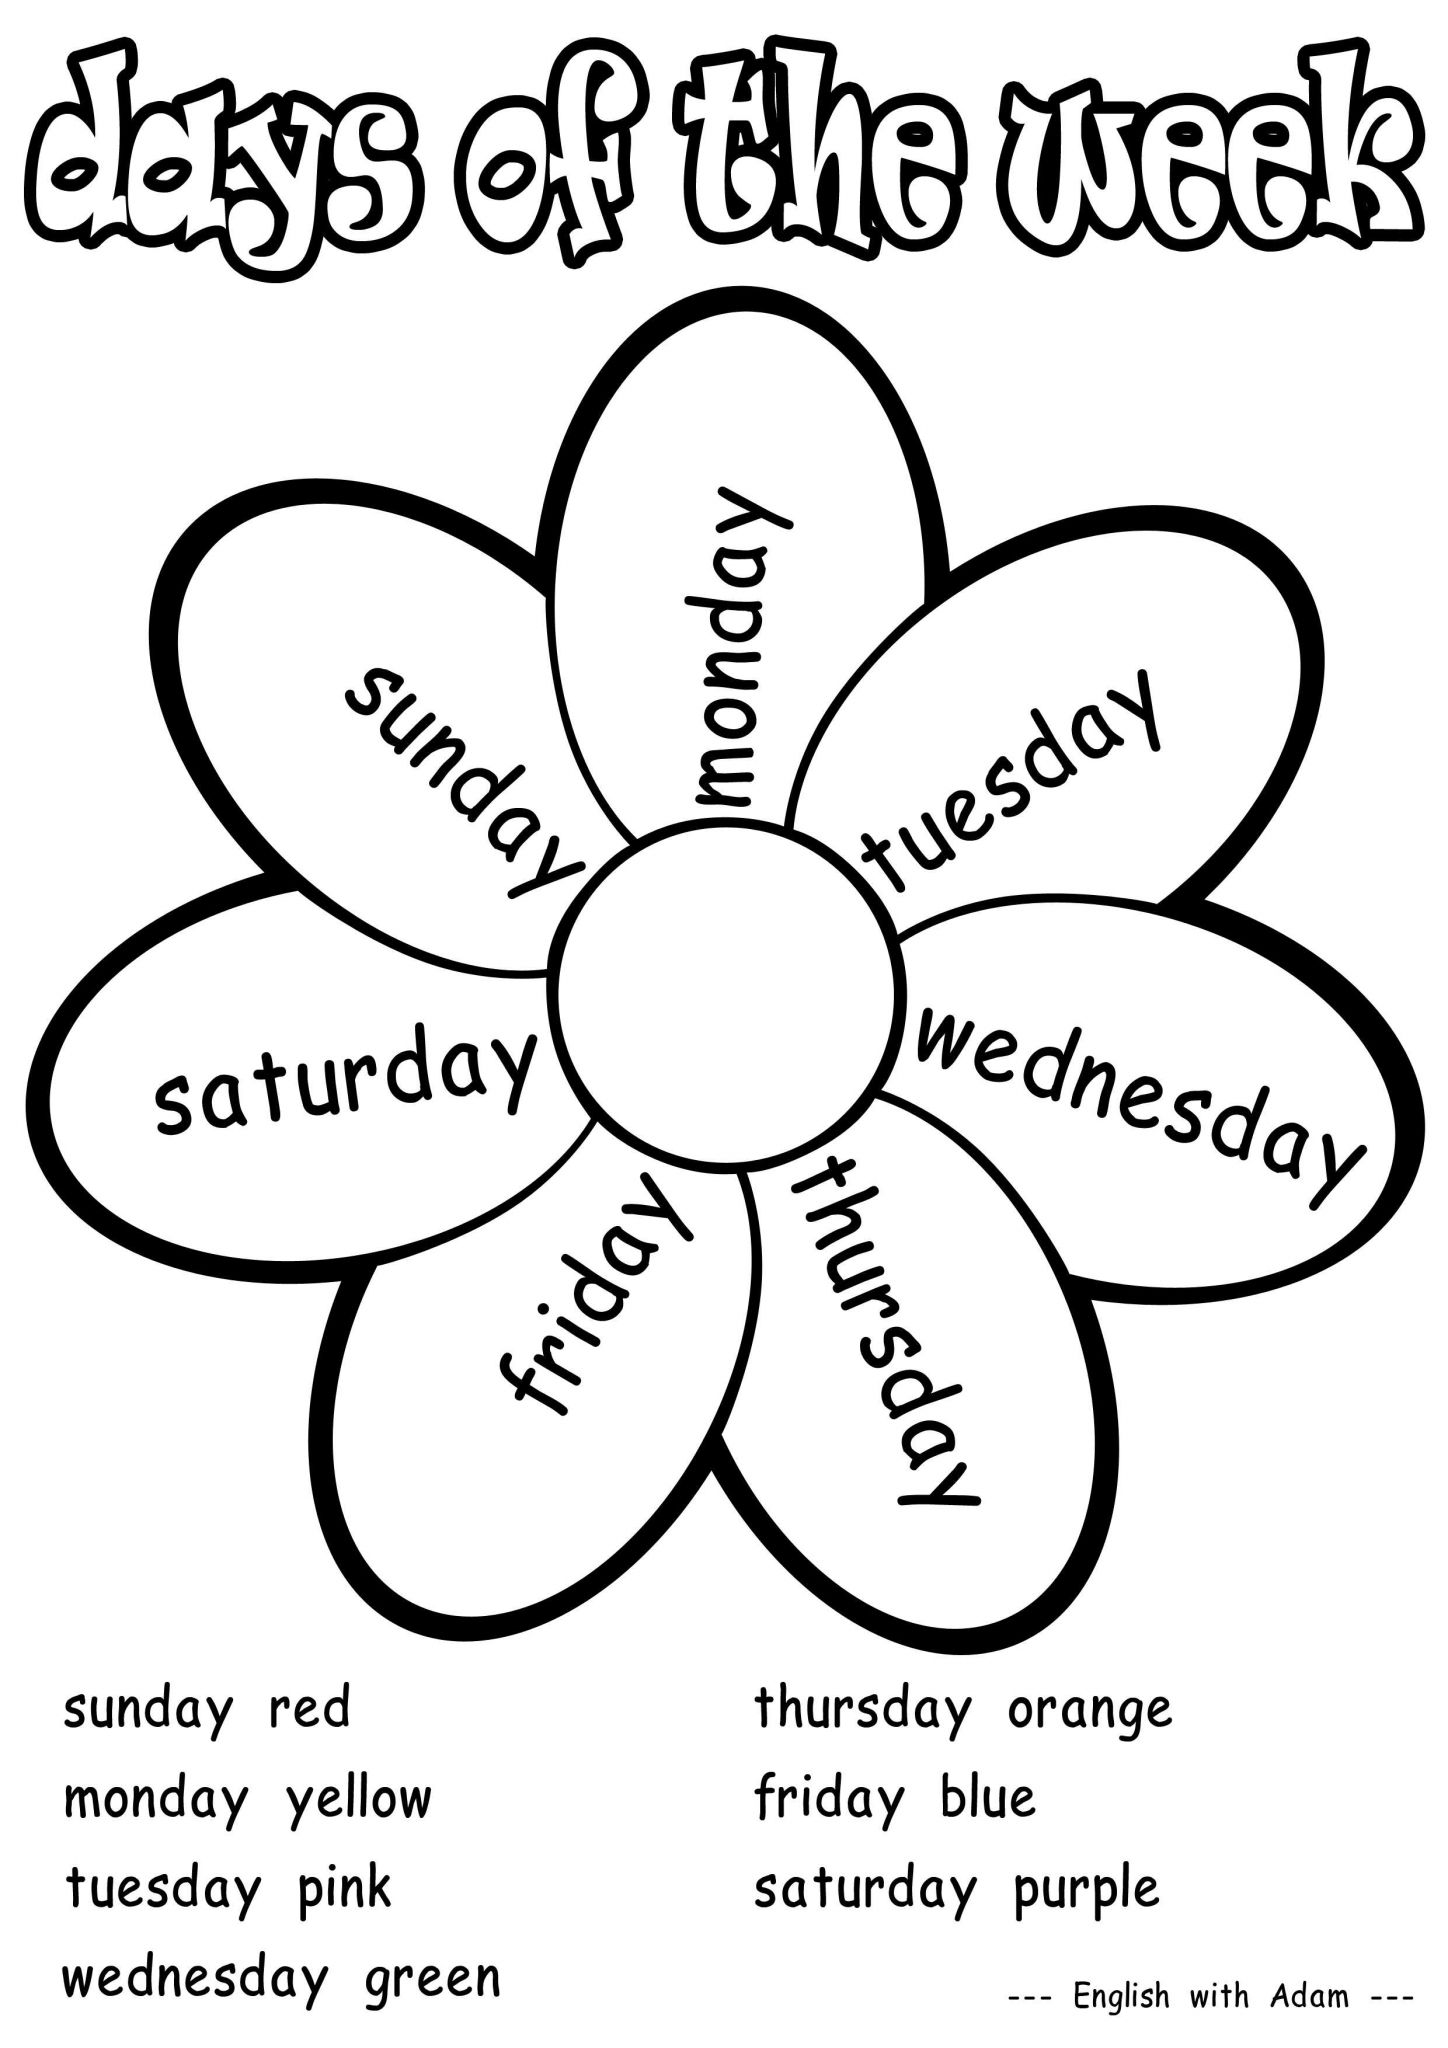 English Worksheets for Grade 1 and Days Of the Week Coloring Activity Grade 1 Worksheets